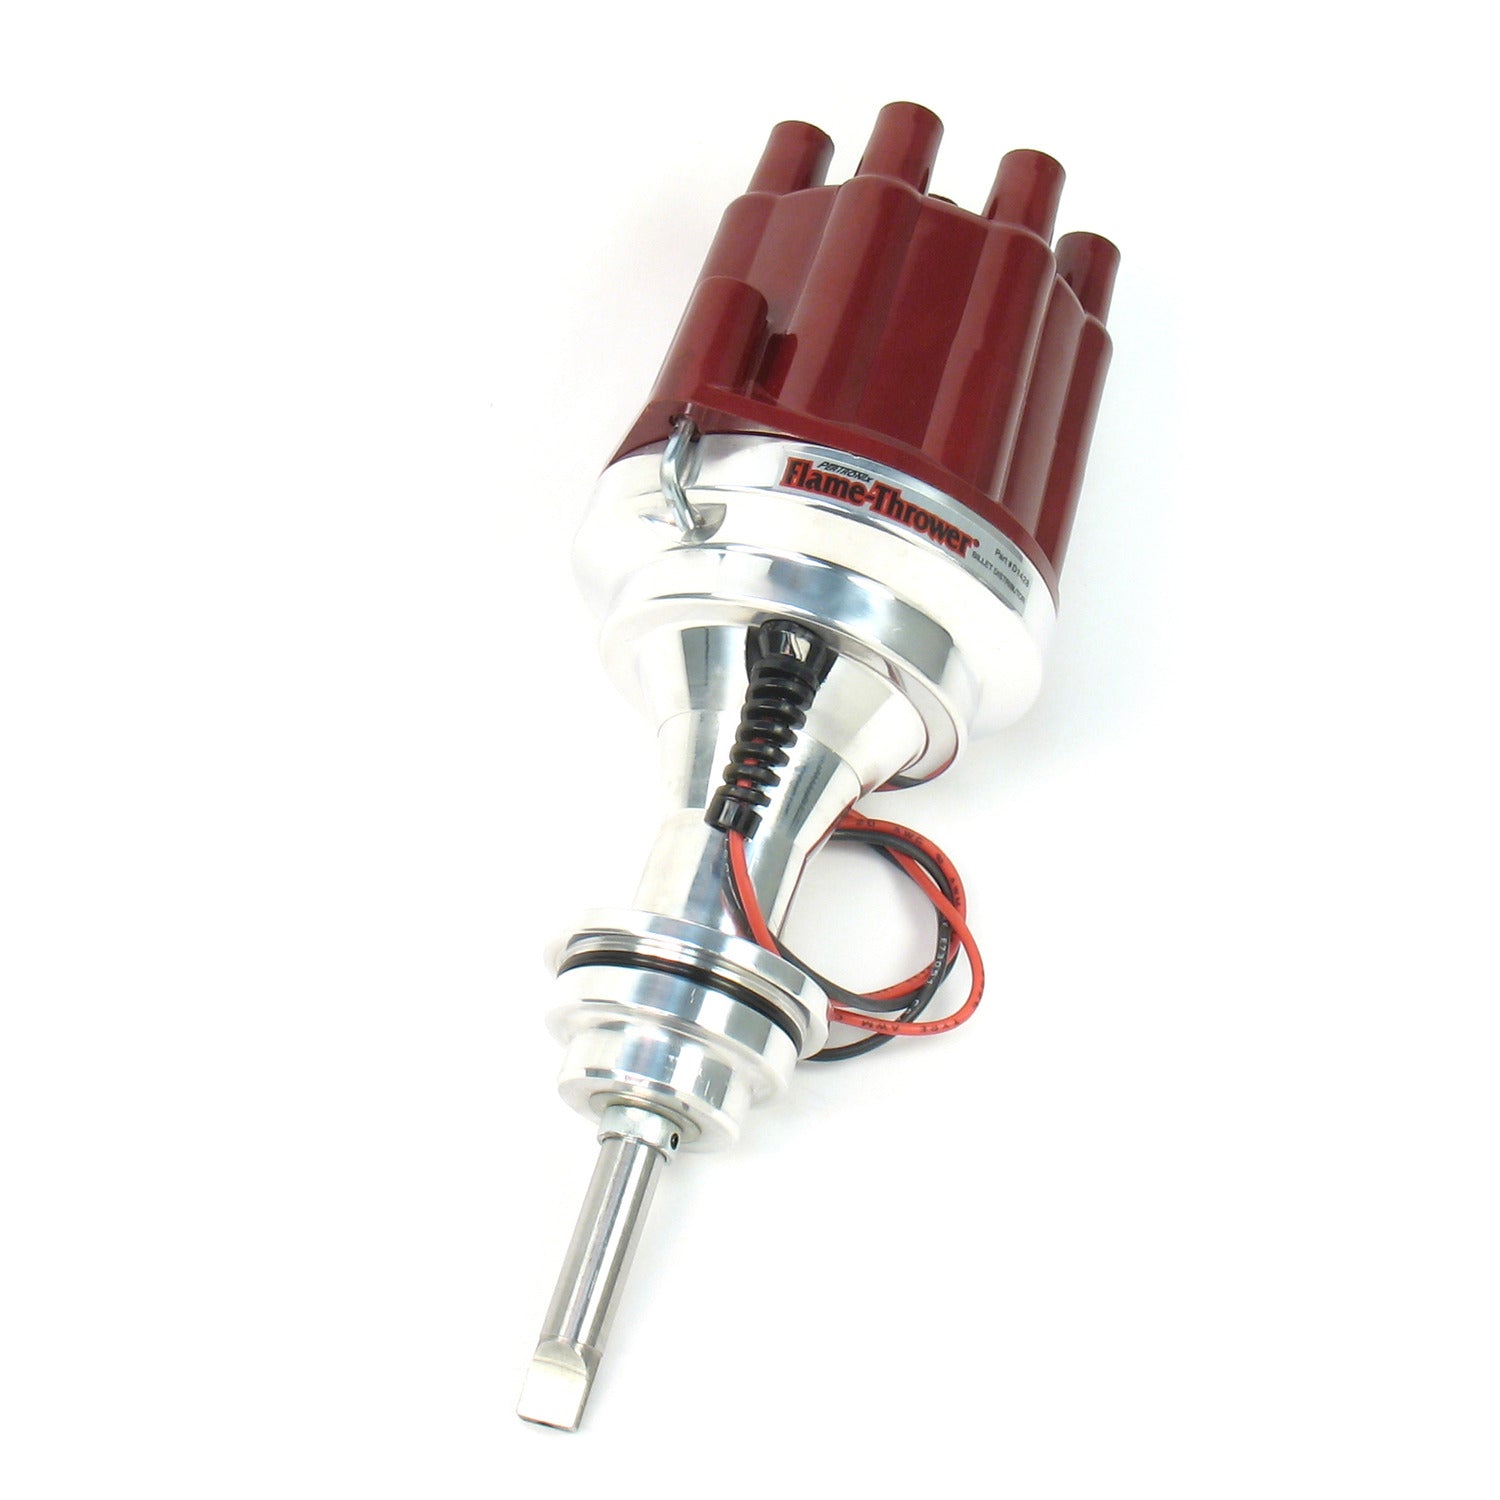 PerTronix D142801 Flame-Thrower Electronic Distributor Billet Chrysler/Dodge/Plymouth 383-400 Plug and Play with Ignitor II Technology Non Vacuum Advance Red Cap